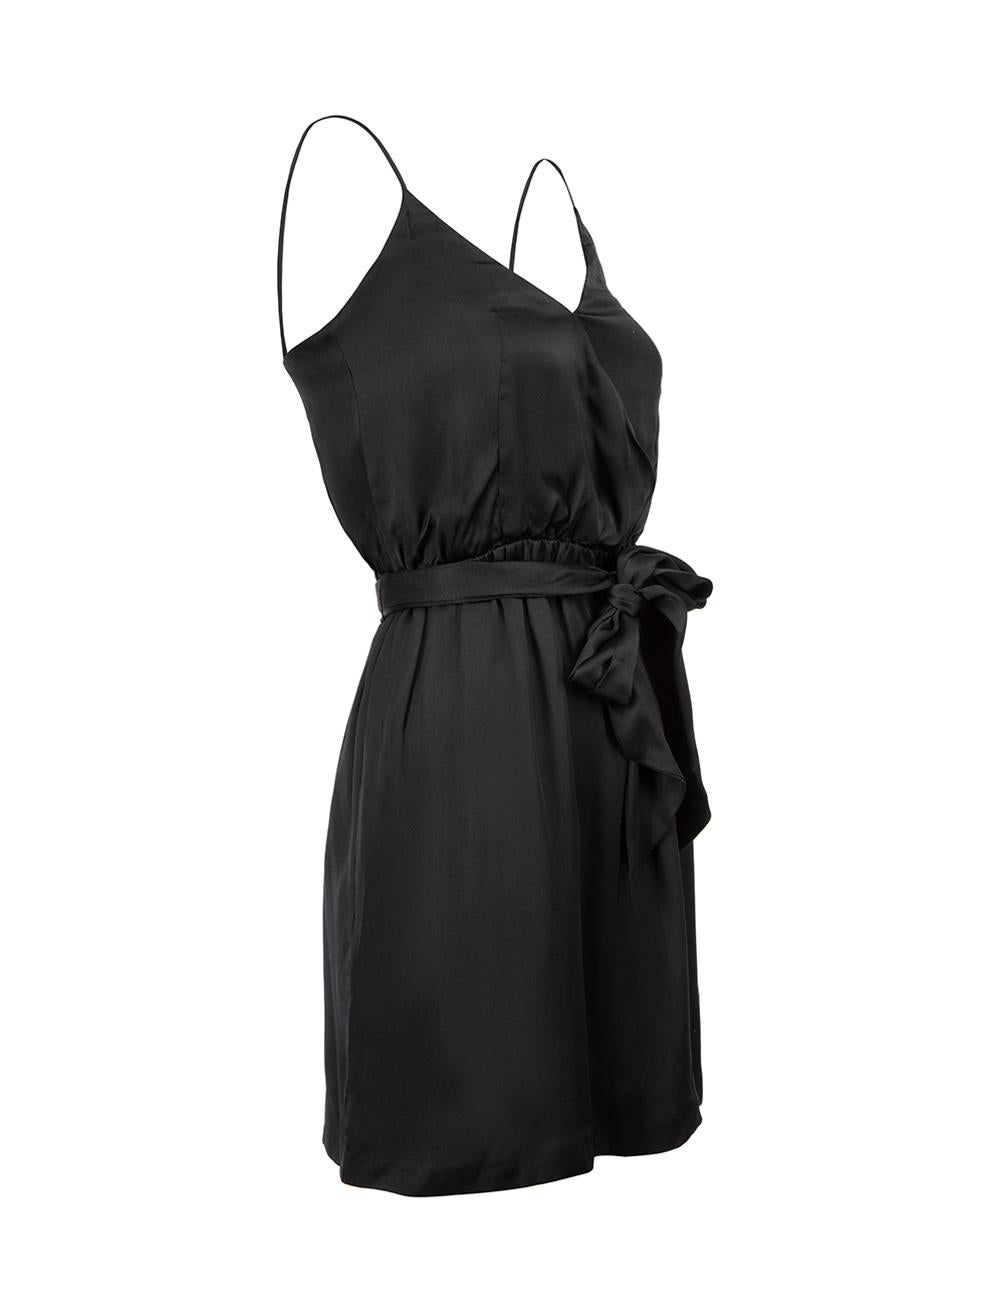 CONDITION is Very good. Minimal wear to dress is evident. Minimal wear to the front and back with pulls to the weave on this used Halston Heritage designer resale item.



Details


Black

Silk

Mini slip dress

V neckline

Spaghetti strapped

Wrap